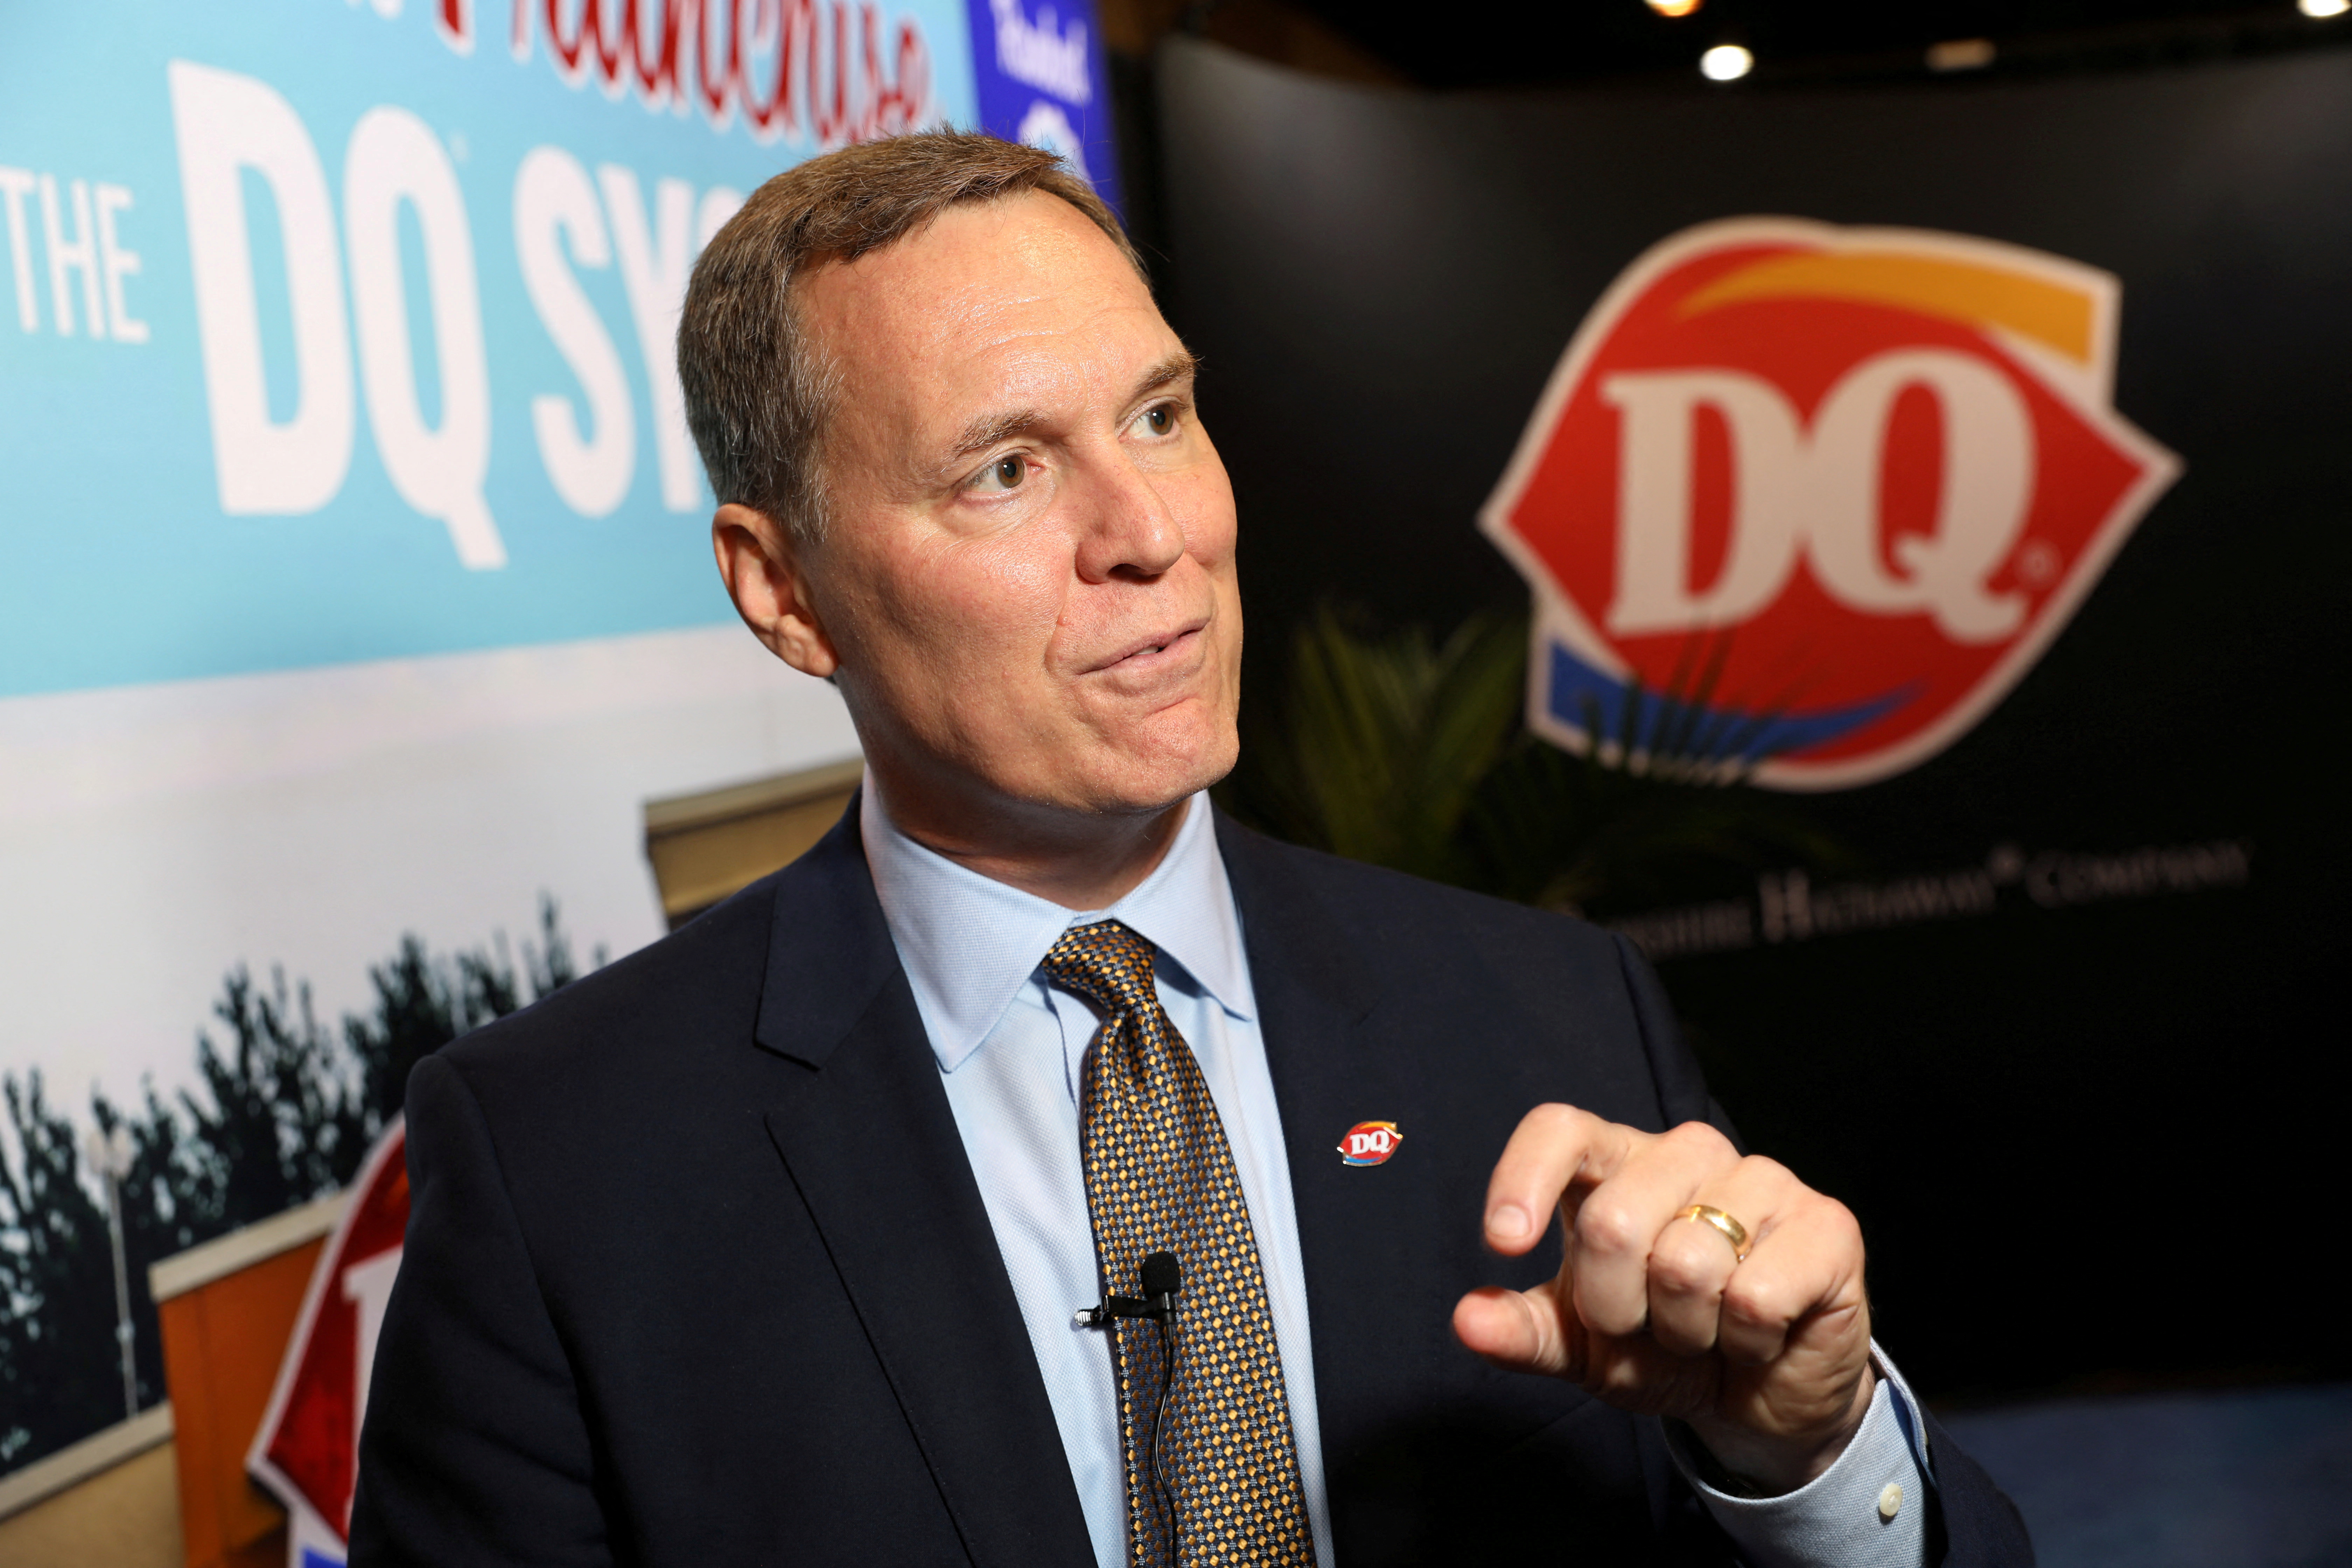 Troy Bader, Cheif Executive of Dairy Queen, a unit of Berkshire Hathaway, at the annual Berkshire shareholder shopping day in Omaha